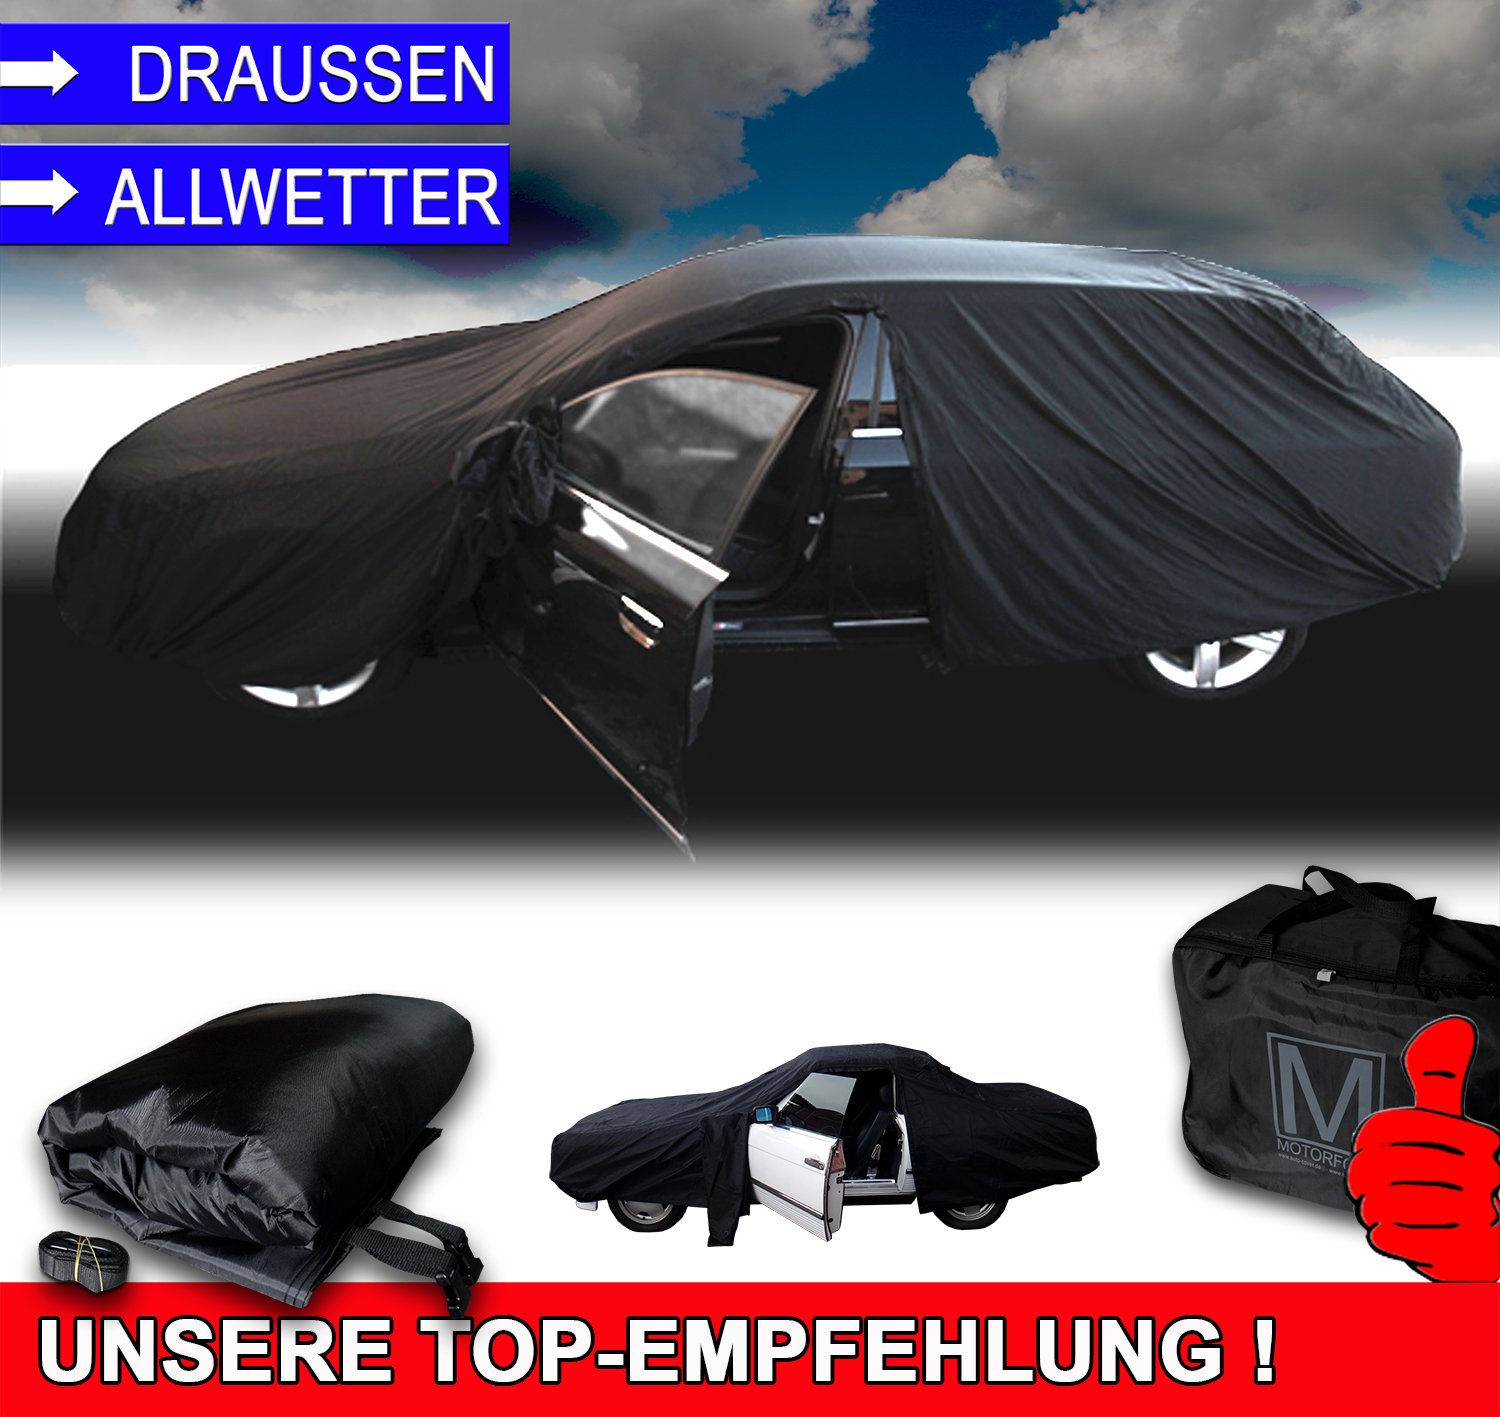 Optimo Outdoor Car Cover for Audi A4 / S4 / RS 4 A4 S4 Avant  (2